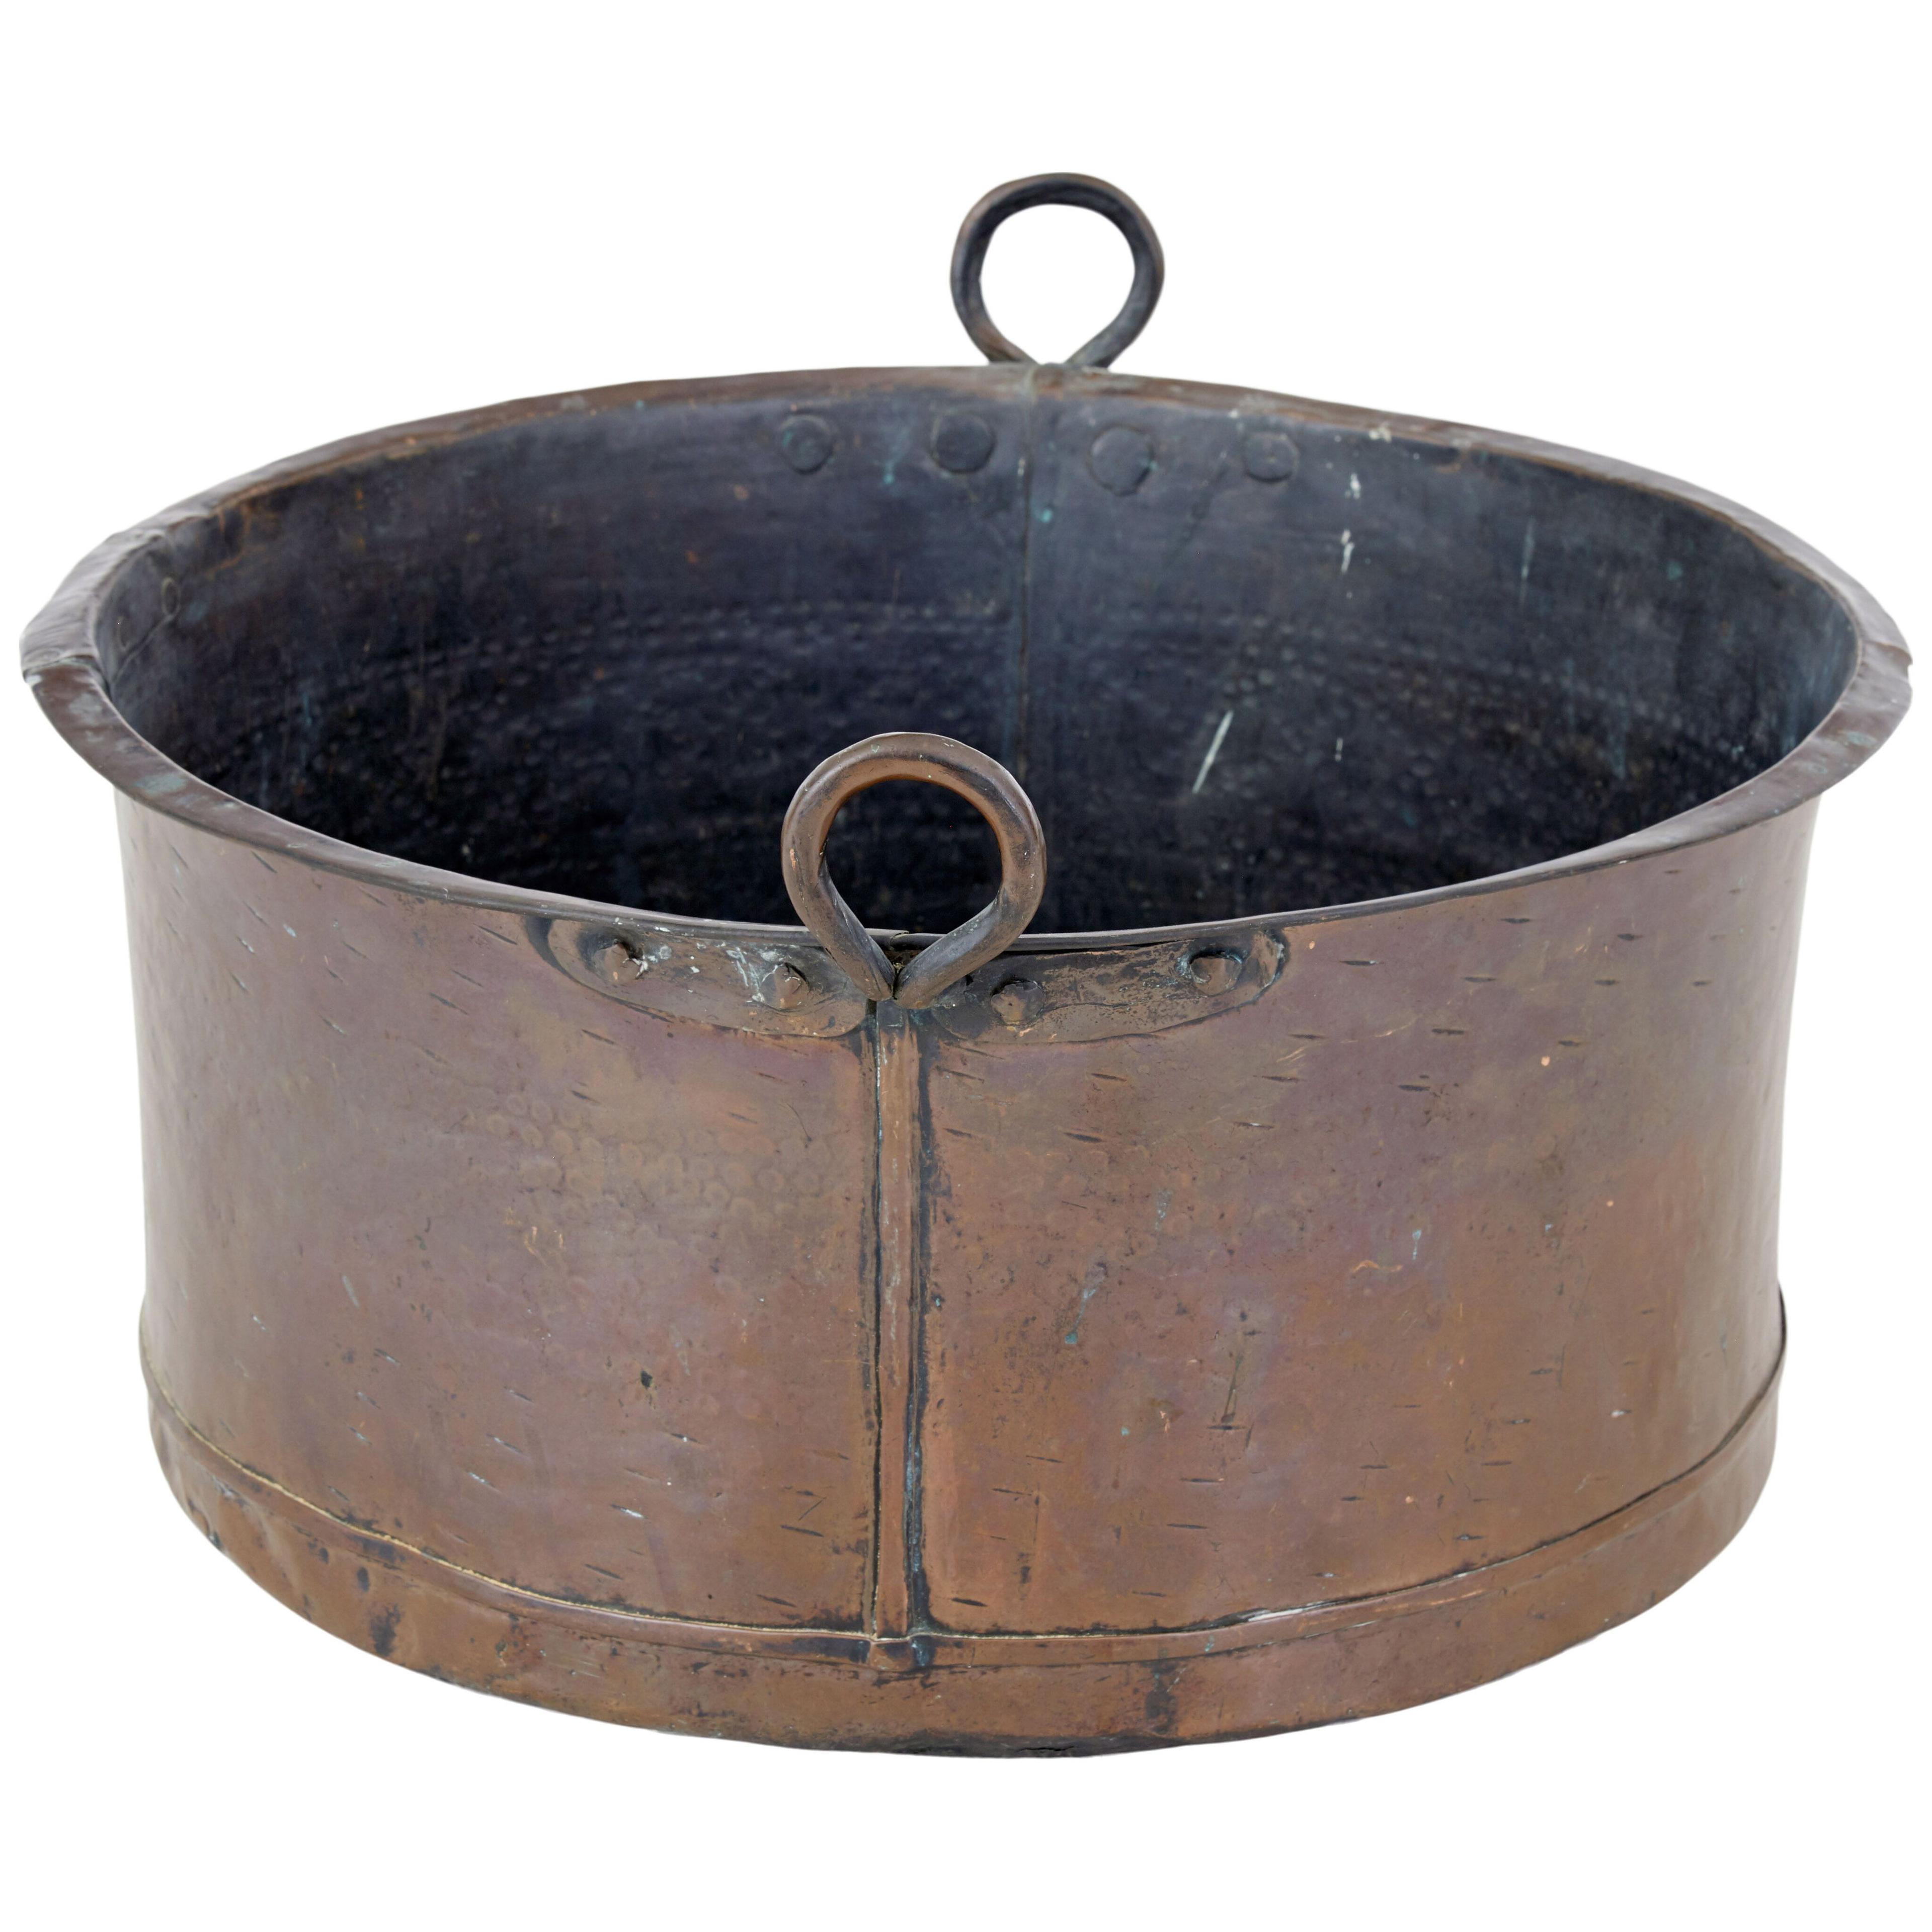 19TH CENTURY LARGE COPPER COOKING VESSEL